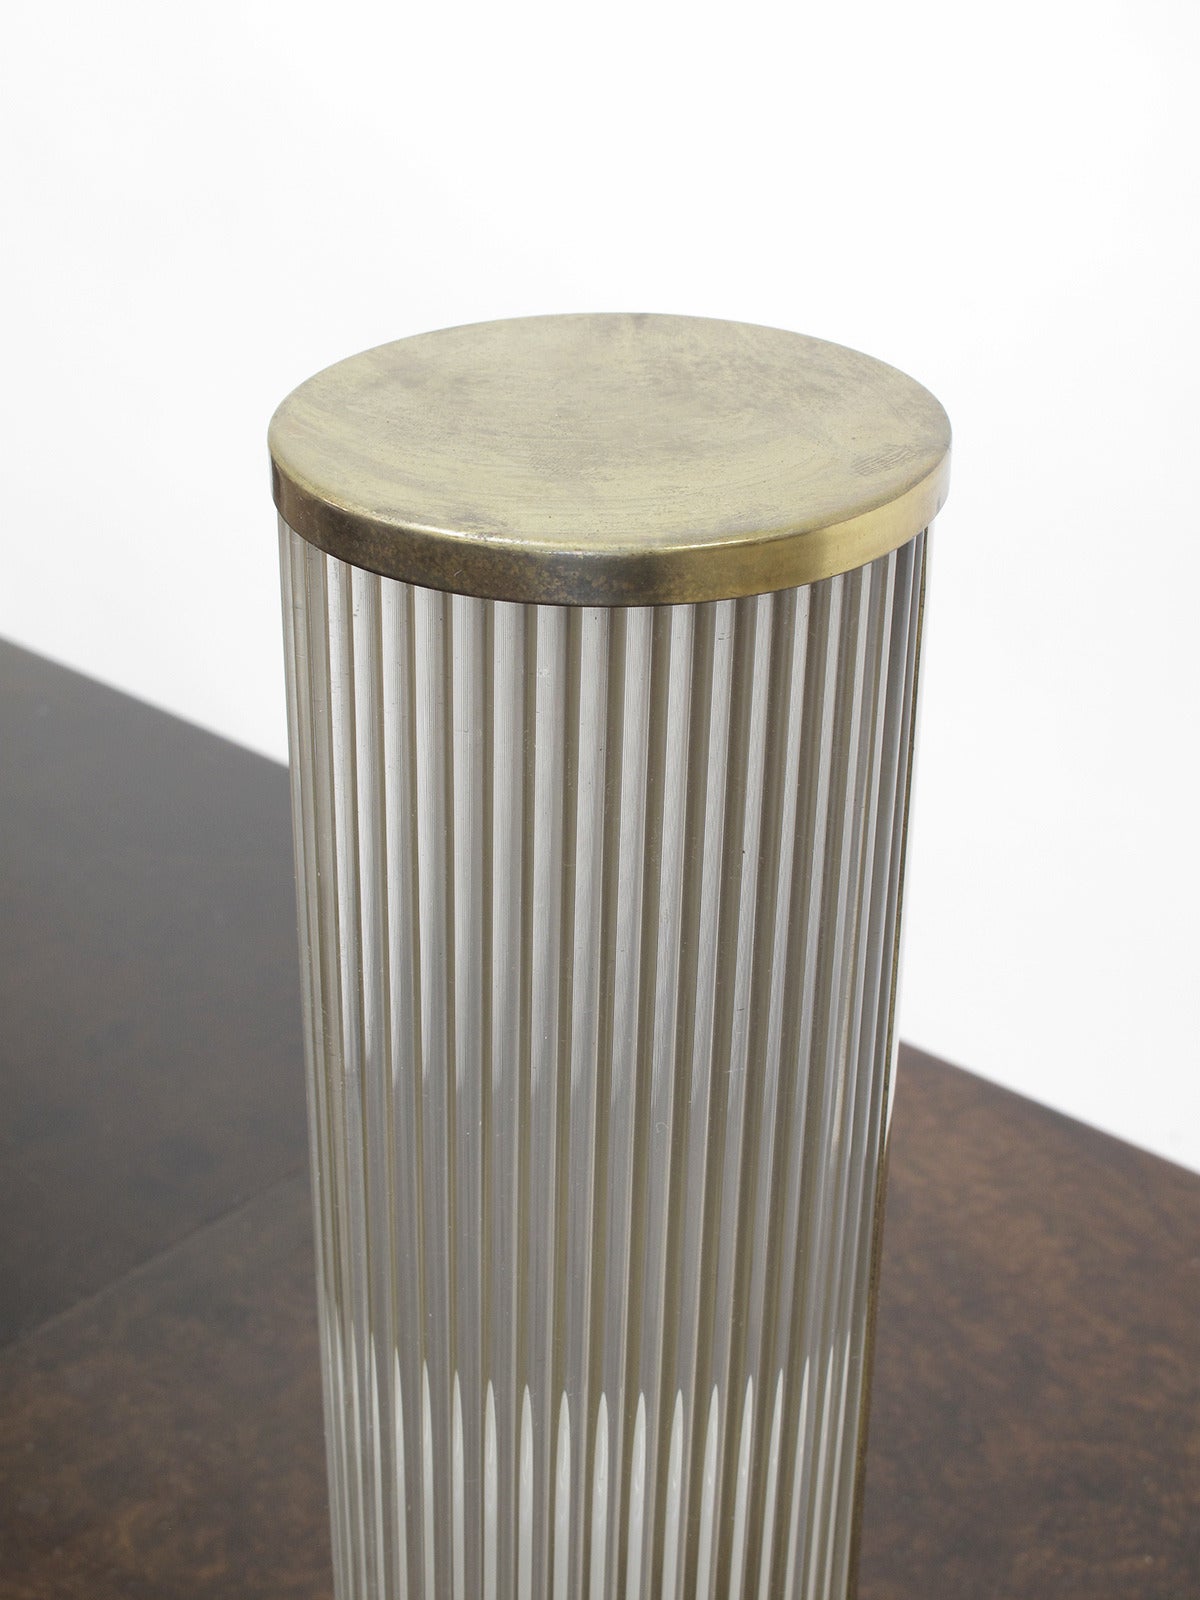 Art Deco Brass Table Lamp by Casella Lighting, 1970s For Sale